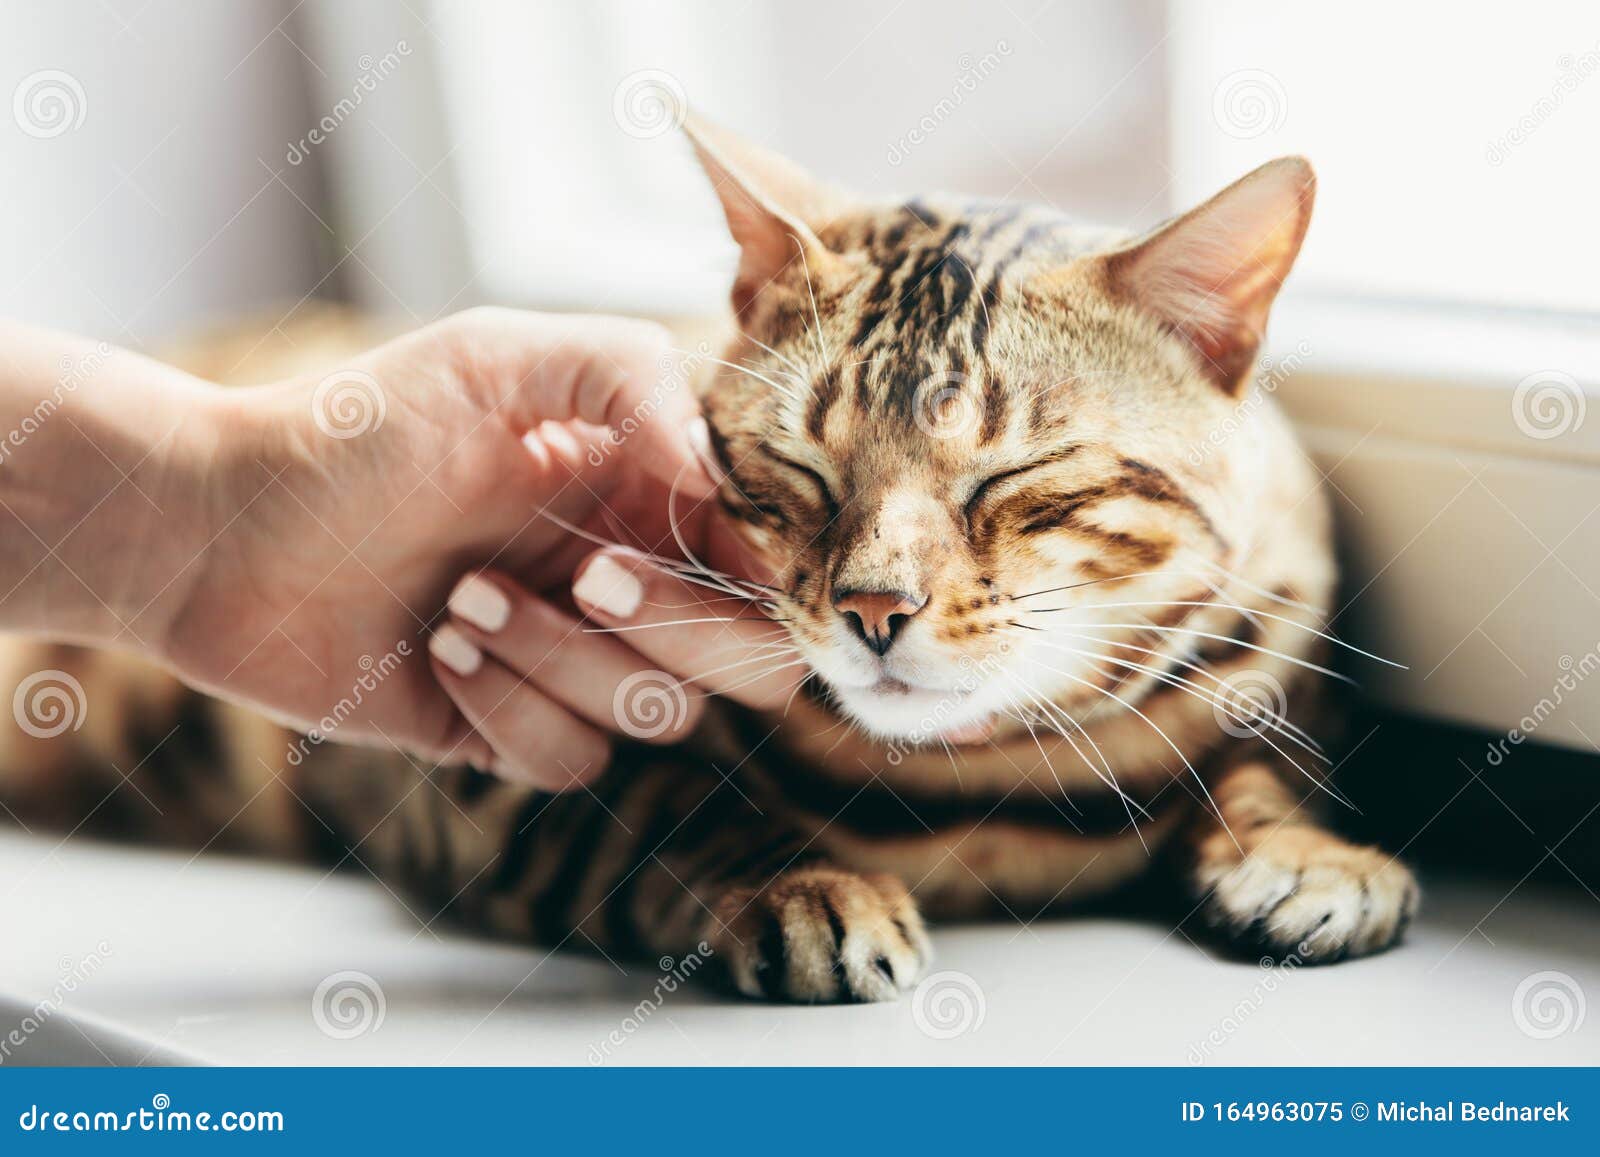 happy bengal cat loves being stroked by woman`s hand